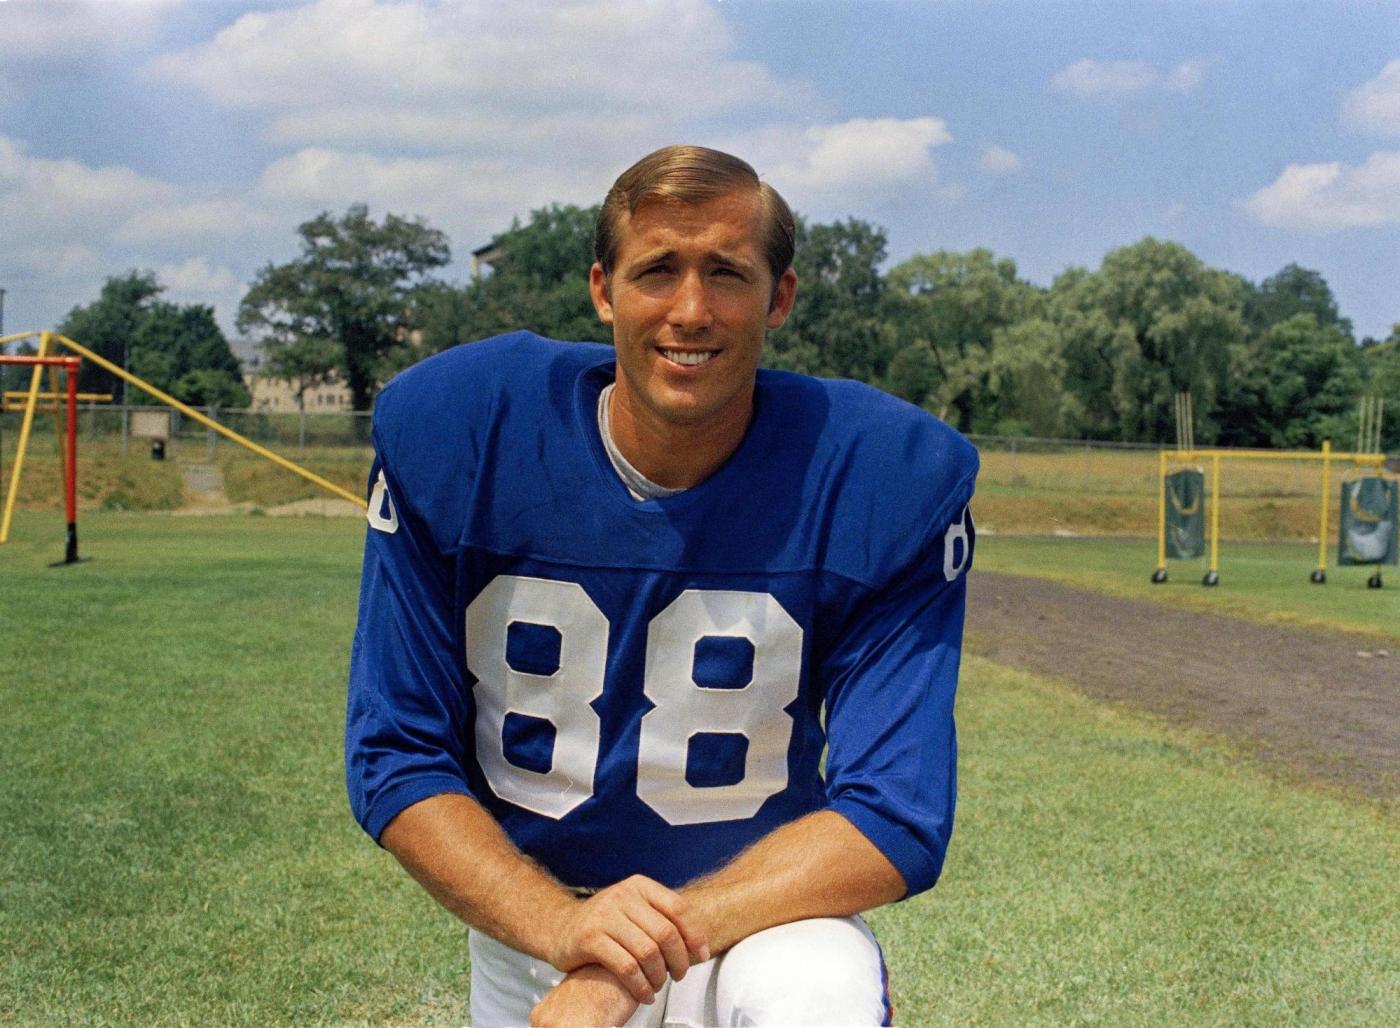 aaron-thomas-dies-at-86;-former-ny-giants-star-was-like-an-‘early-version-of-travis-kelce’